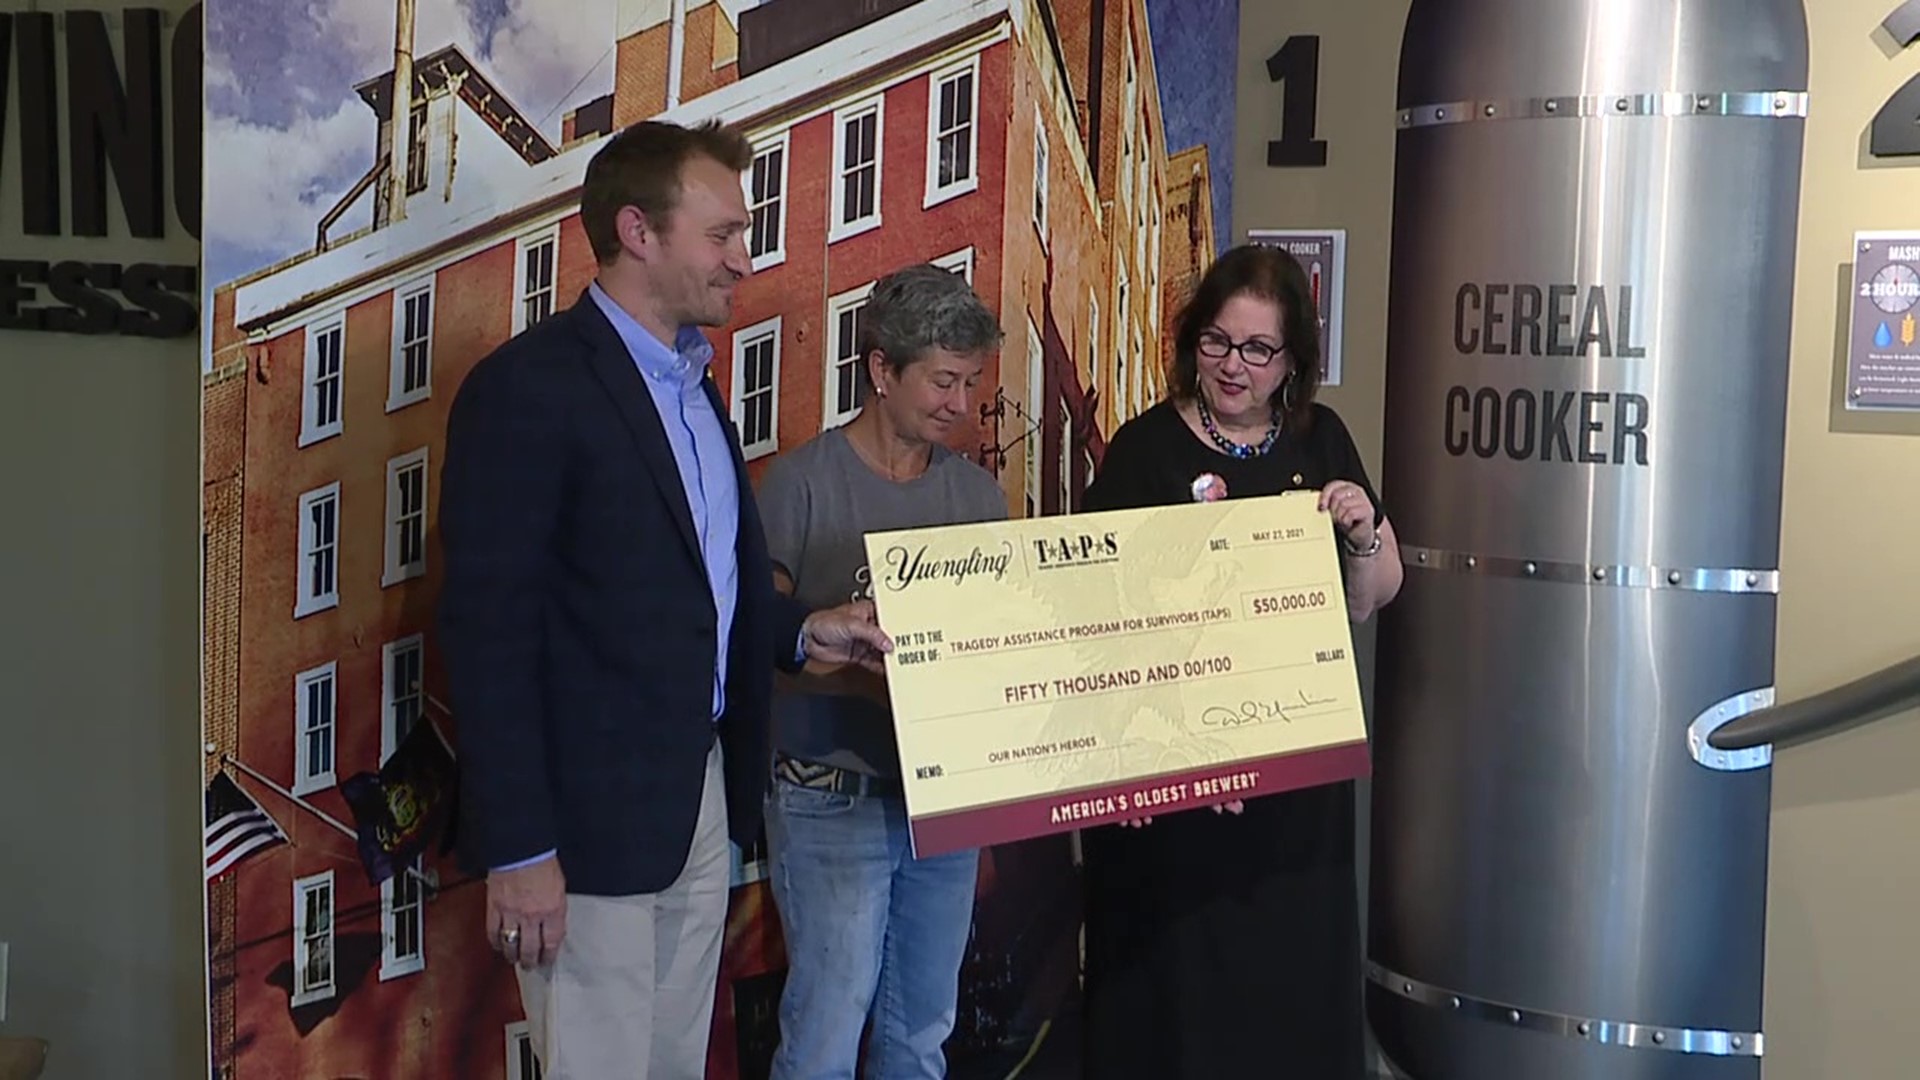 Yuengling donated $50,000 to Taps, a group that supports the families of soldiers who have died while serving our country.